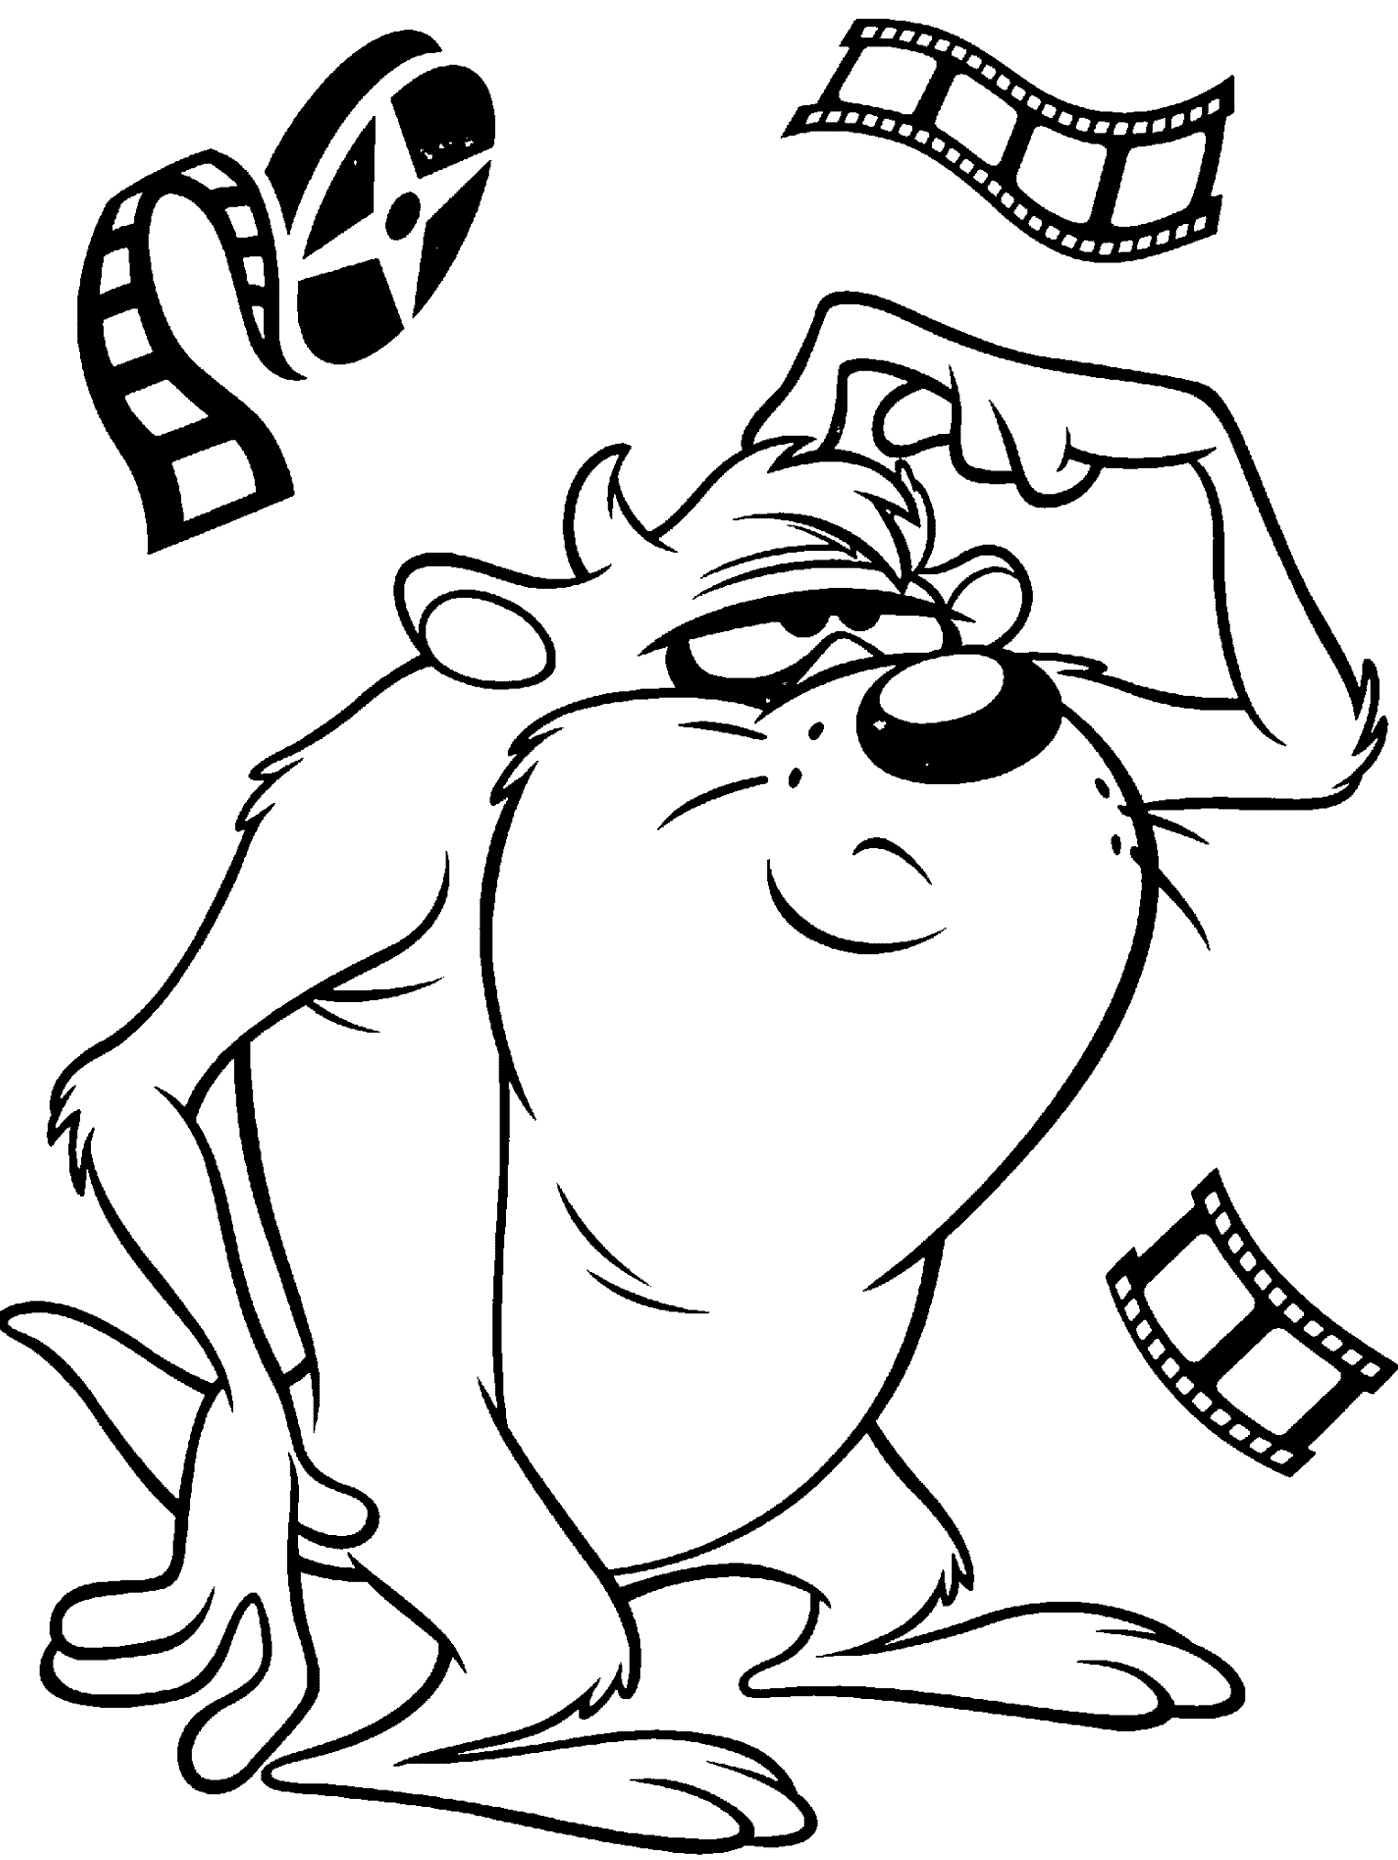 Taz the Tasmanian Devil Coloring page : LOONEY TUNES SPOT COLORING ...